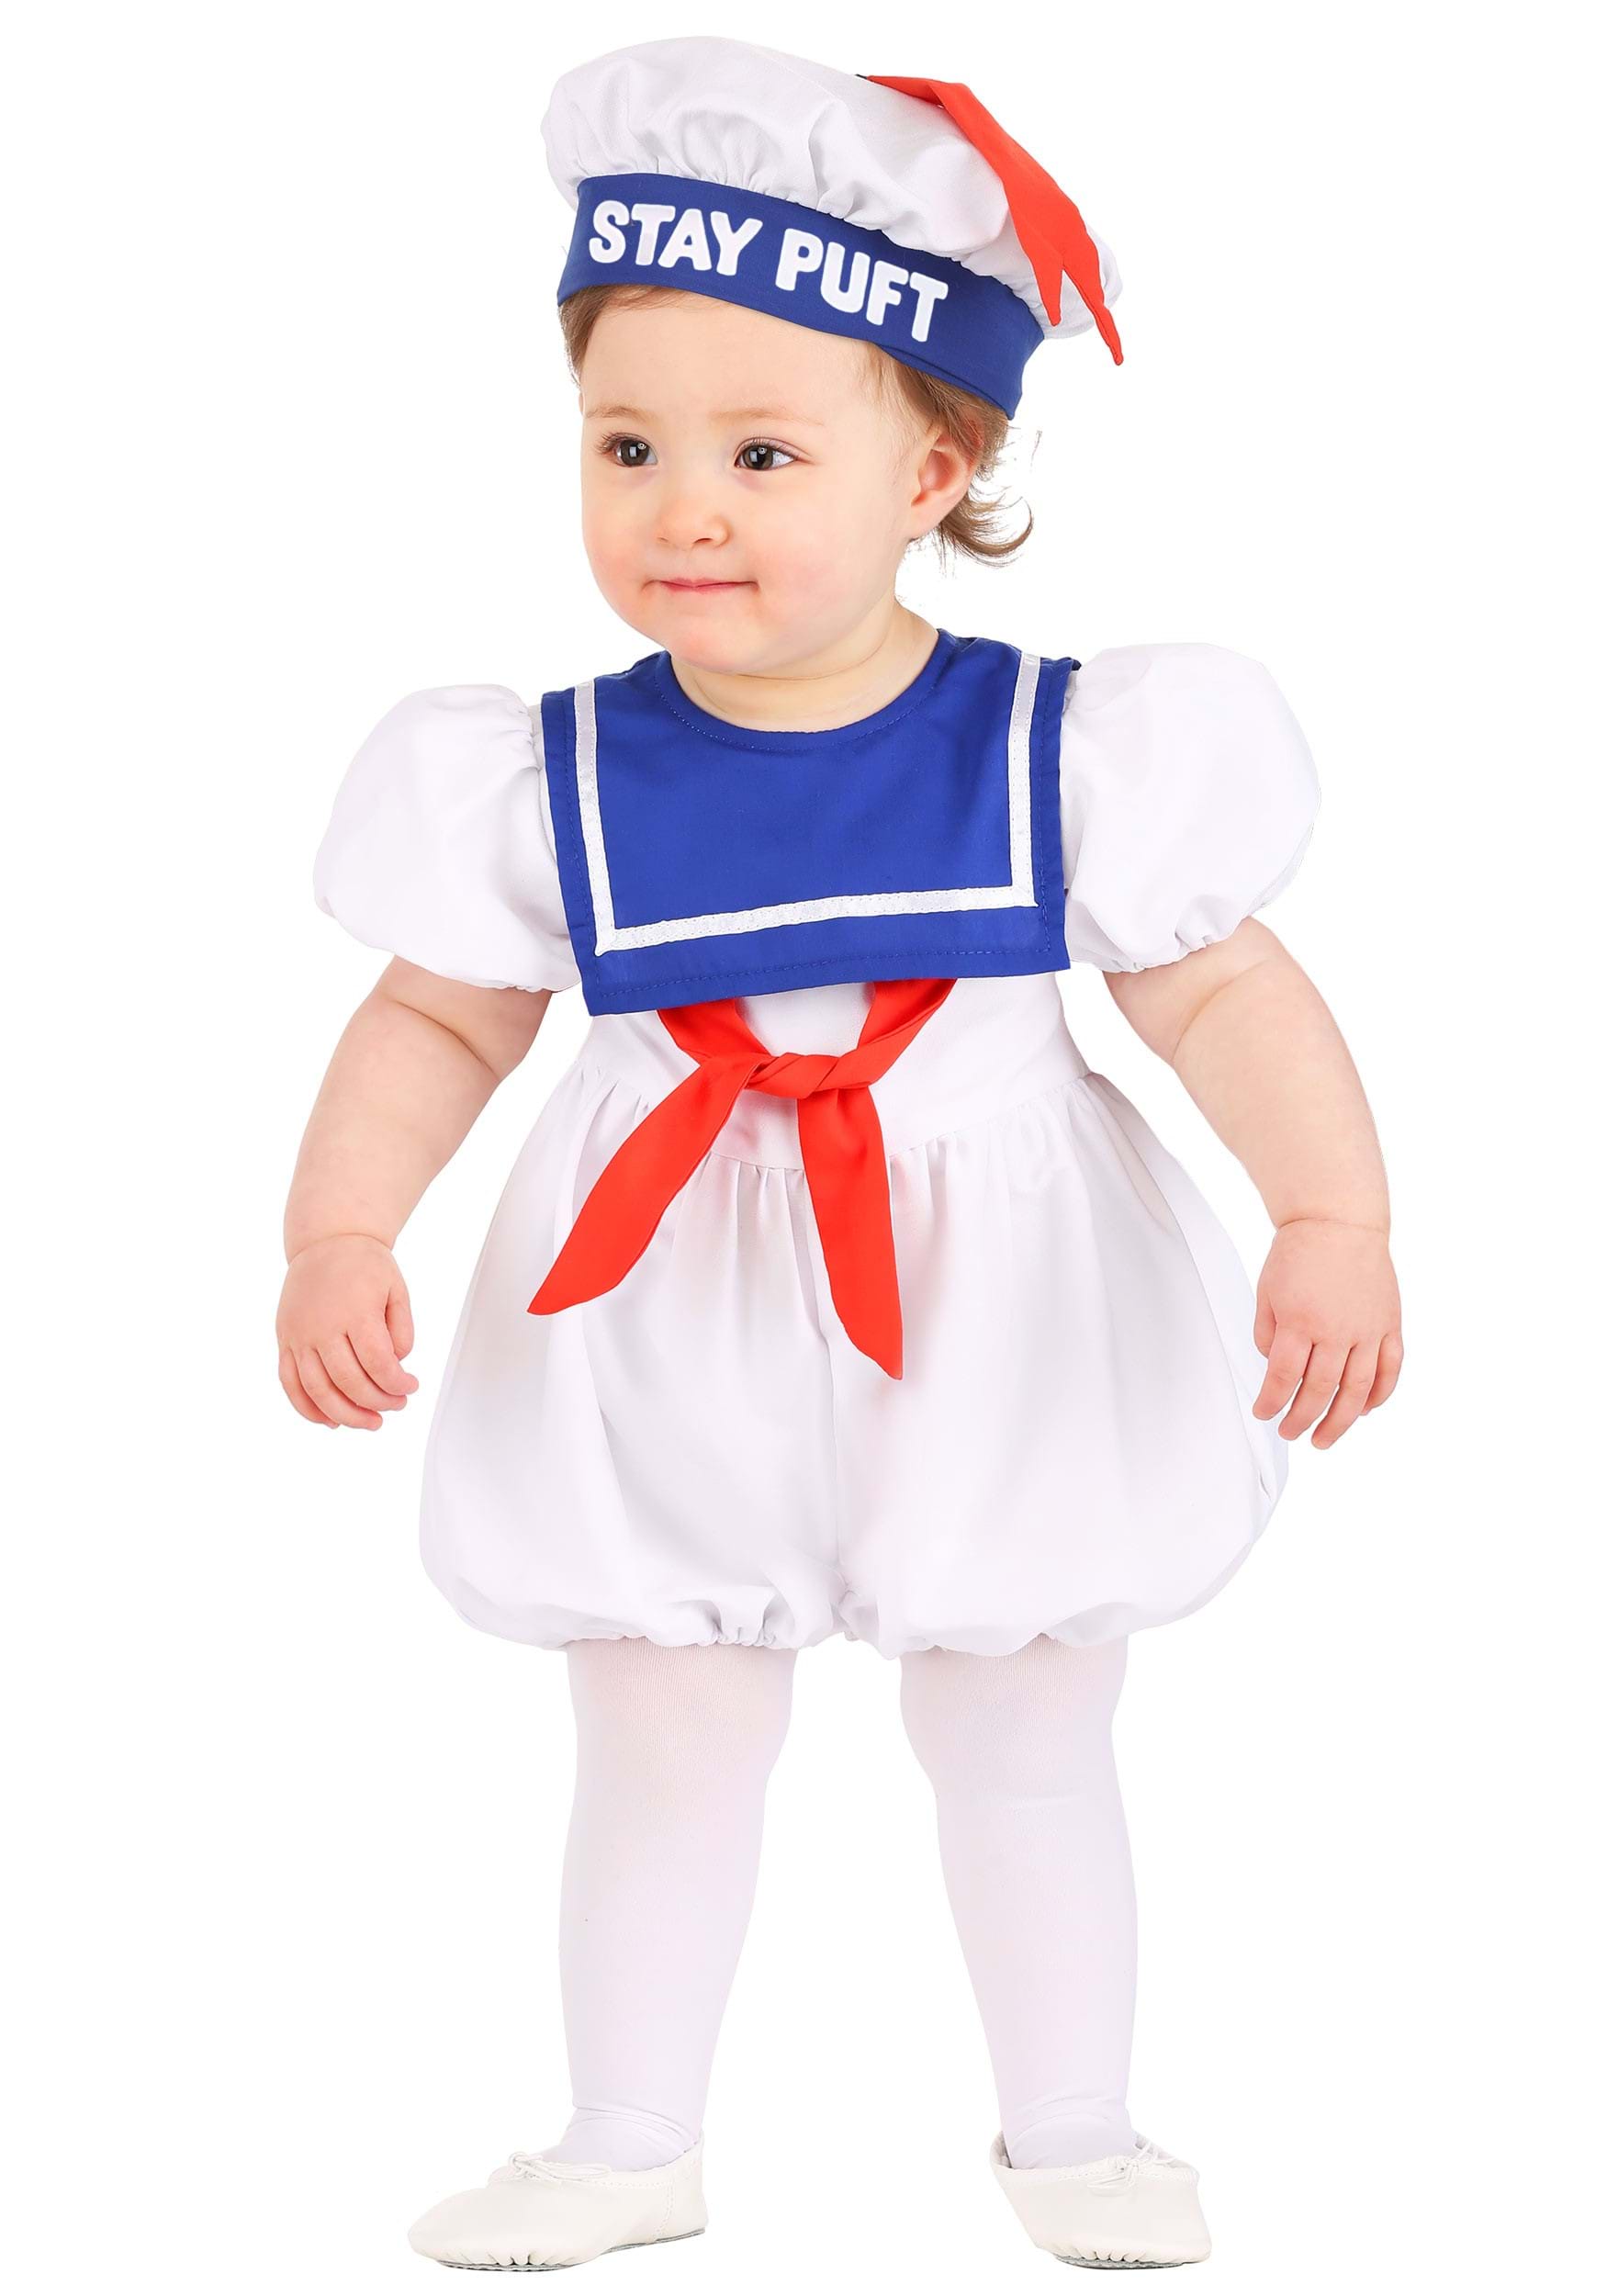 Photos - Fancy Dress Ghostbusters FUN Costumes  Stay Puft Bubble Infant Costume Blue/Red/ 